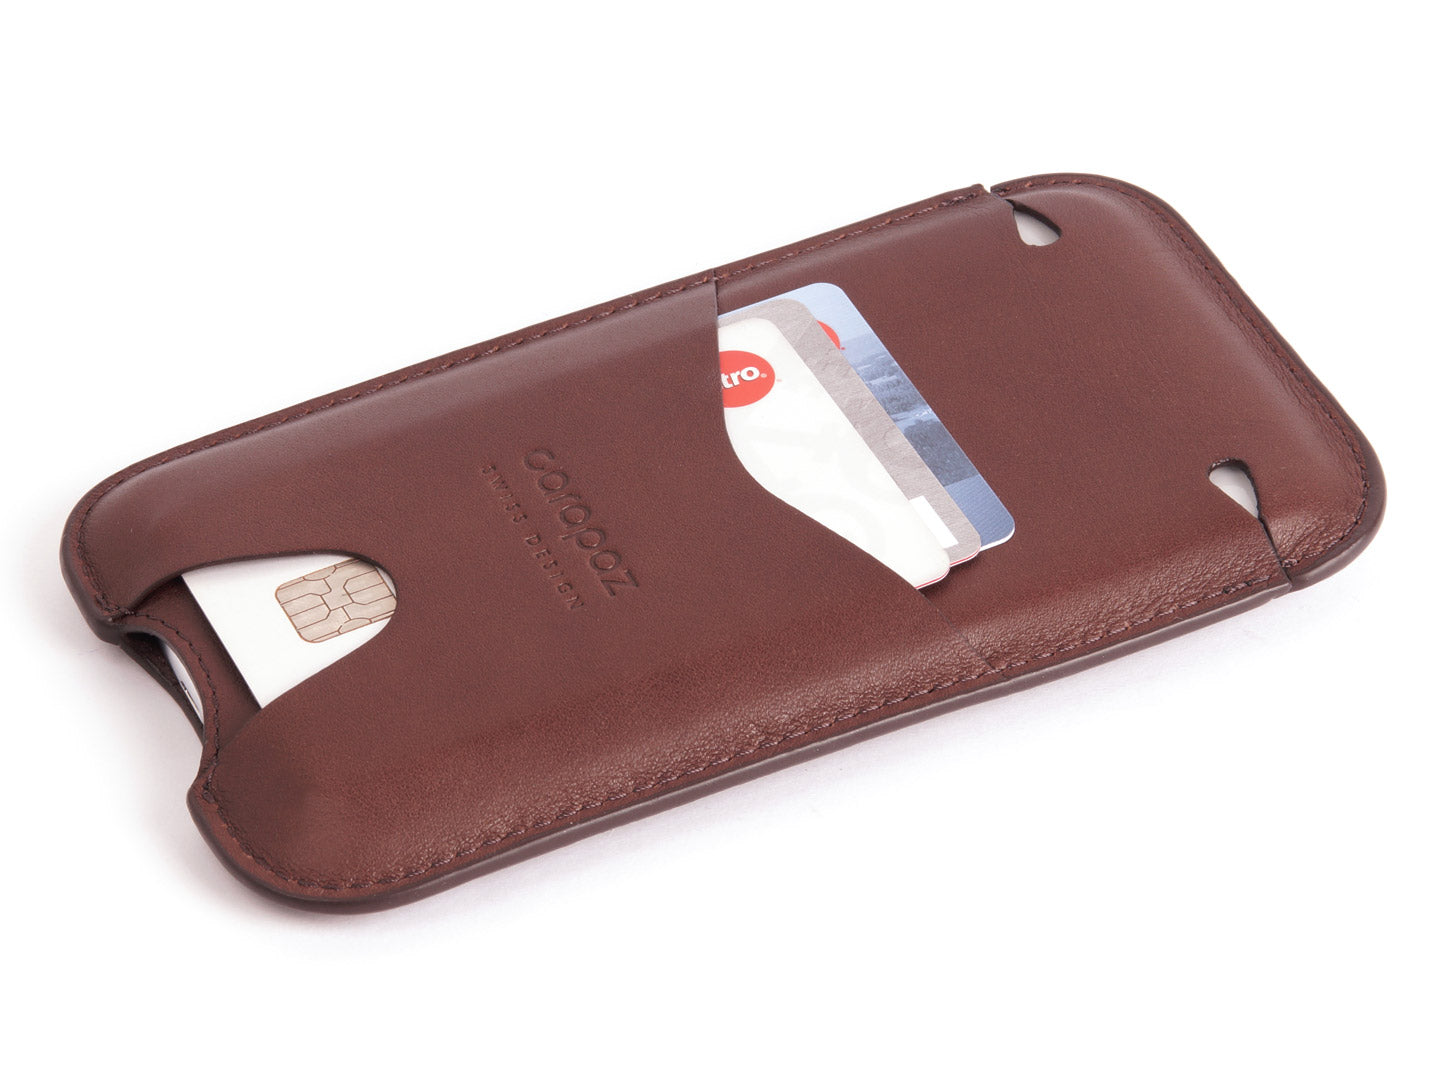 iPhone X / Xs / 11 Pro Leather Pouch - Protective Sleeve Case - Brown Natural Leather - side - Carapaz